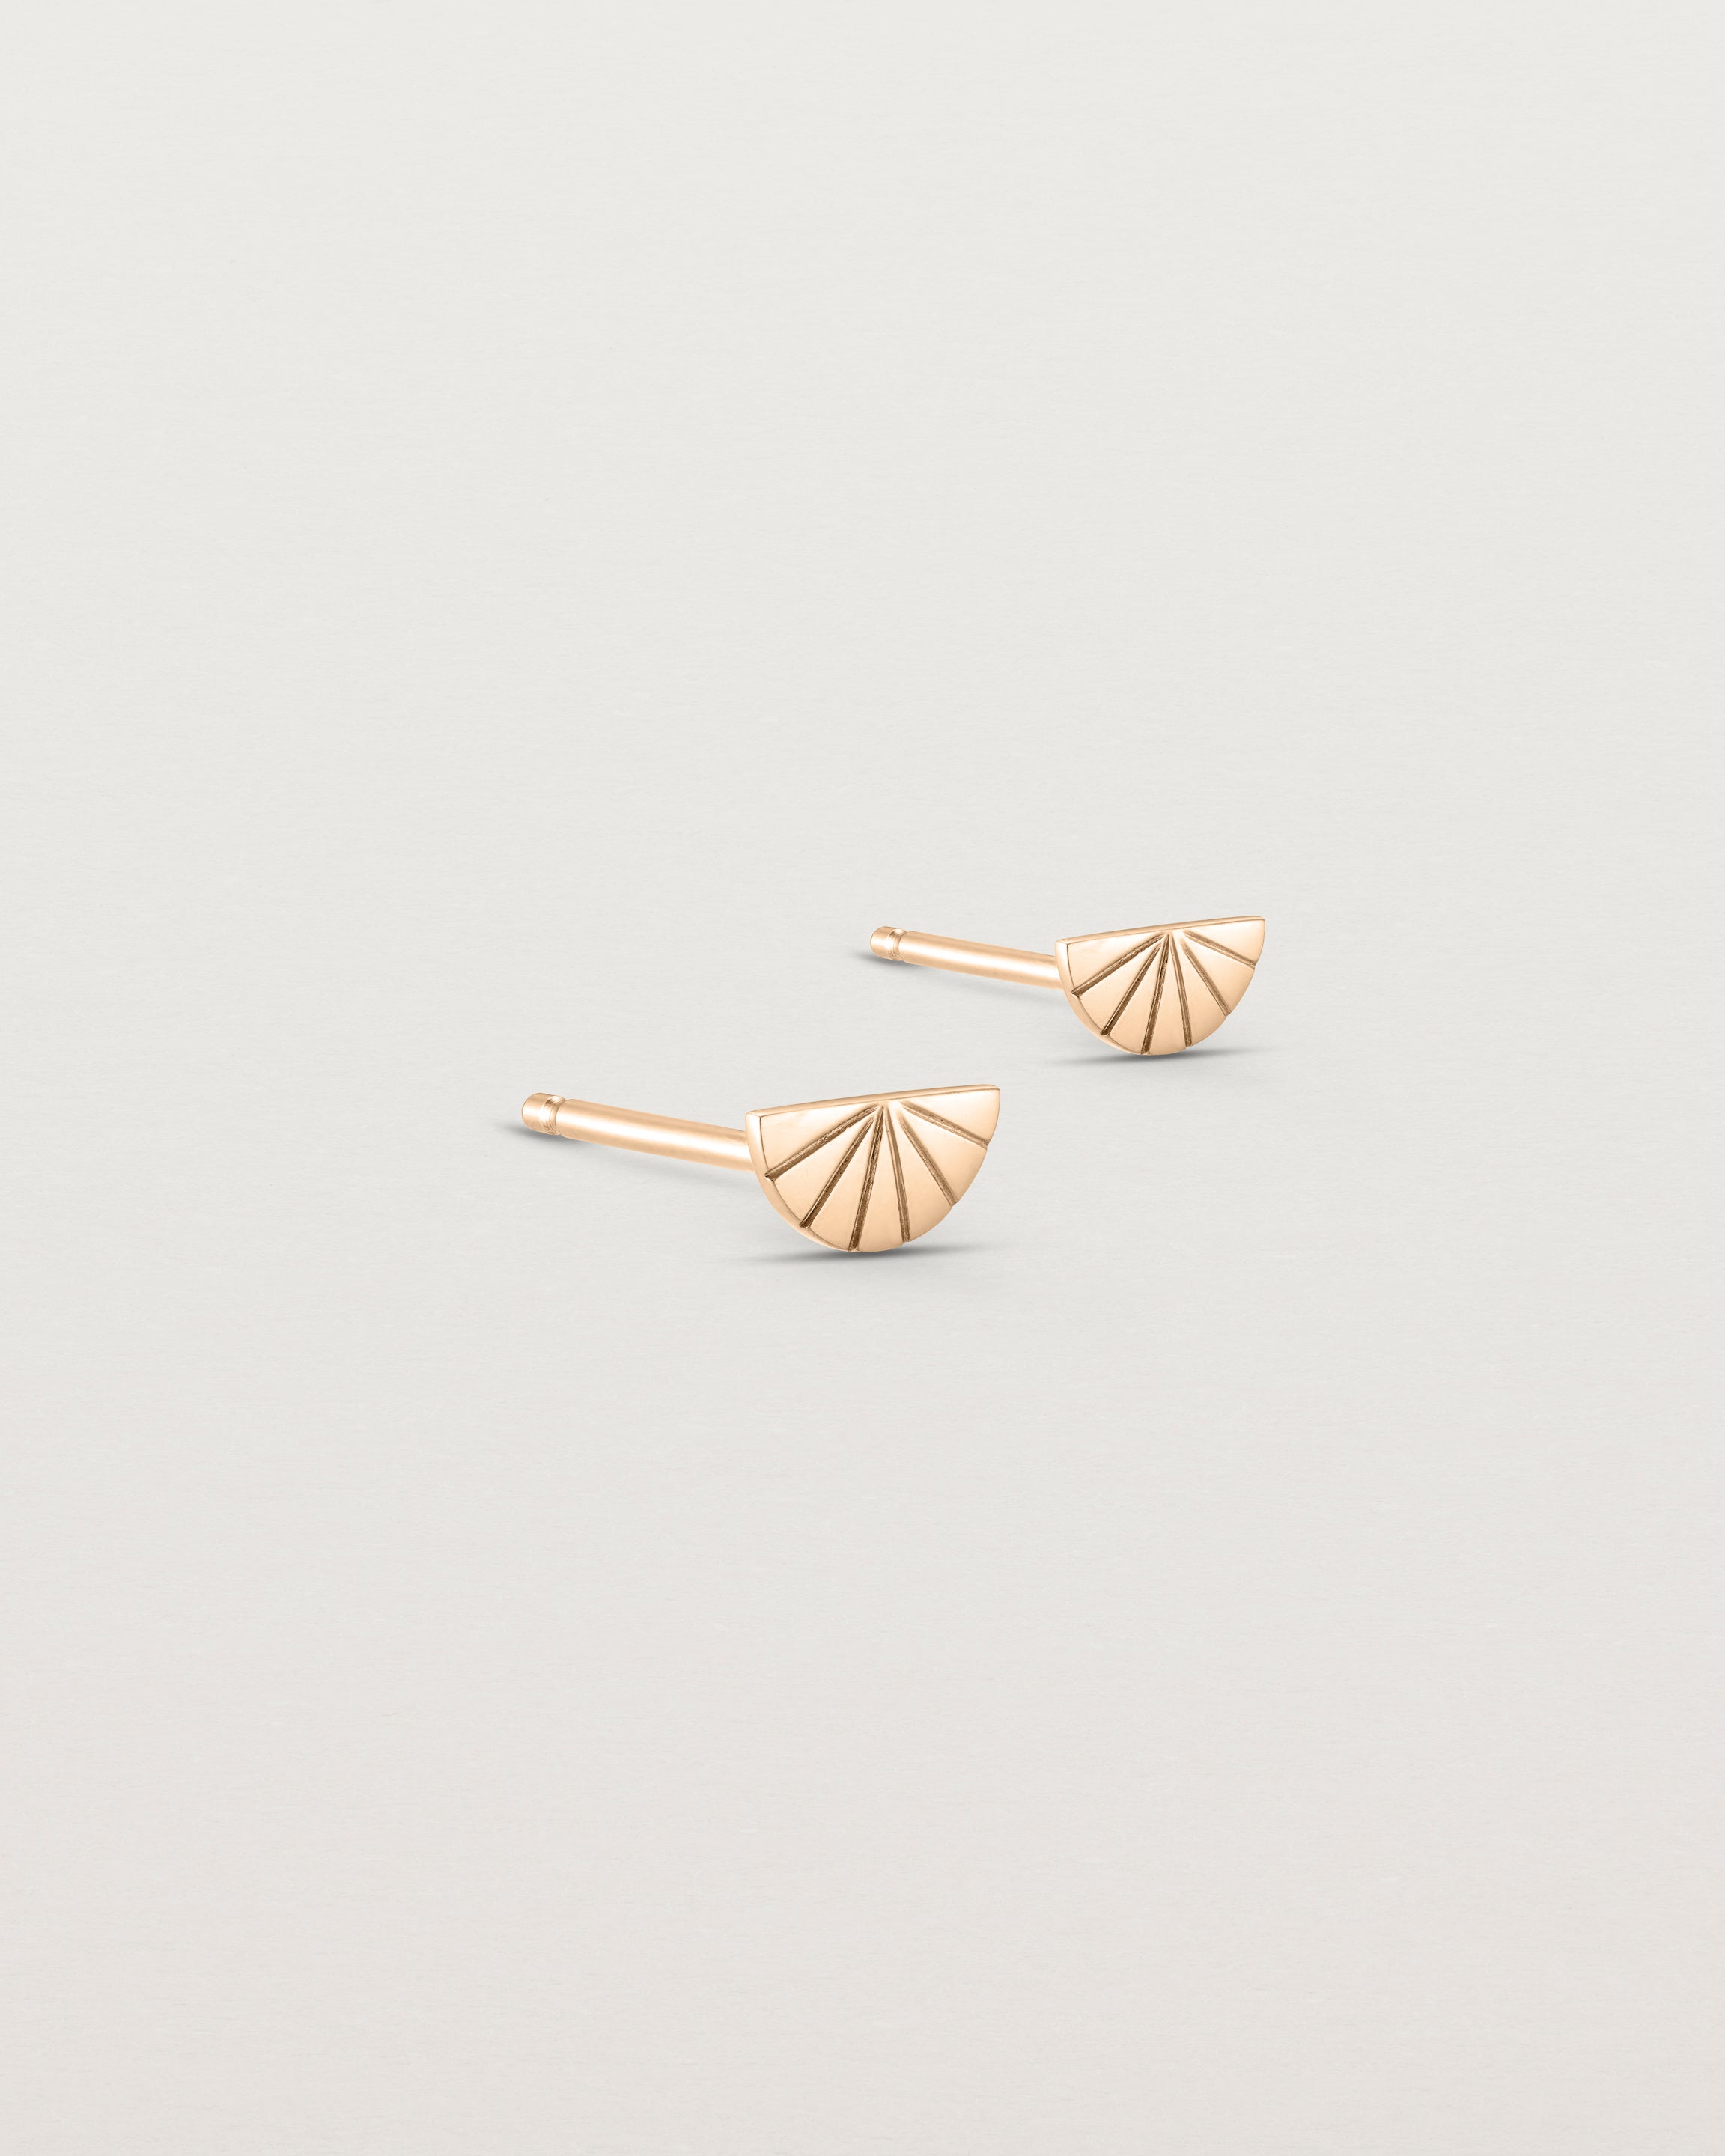 Angled view of the Jia Studs in rose gold.